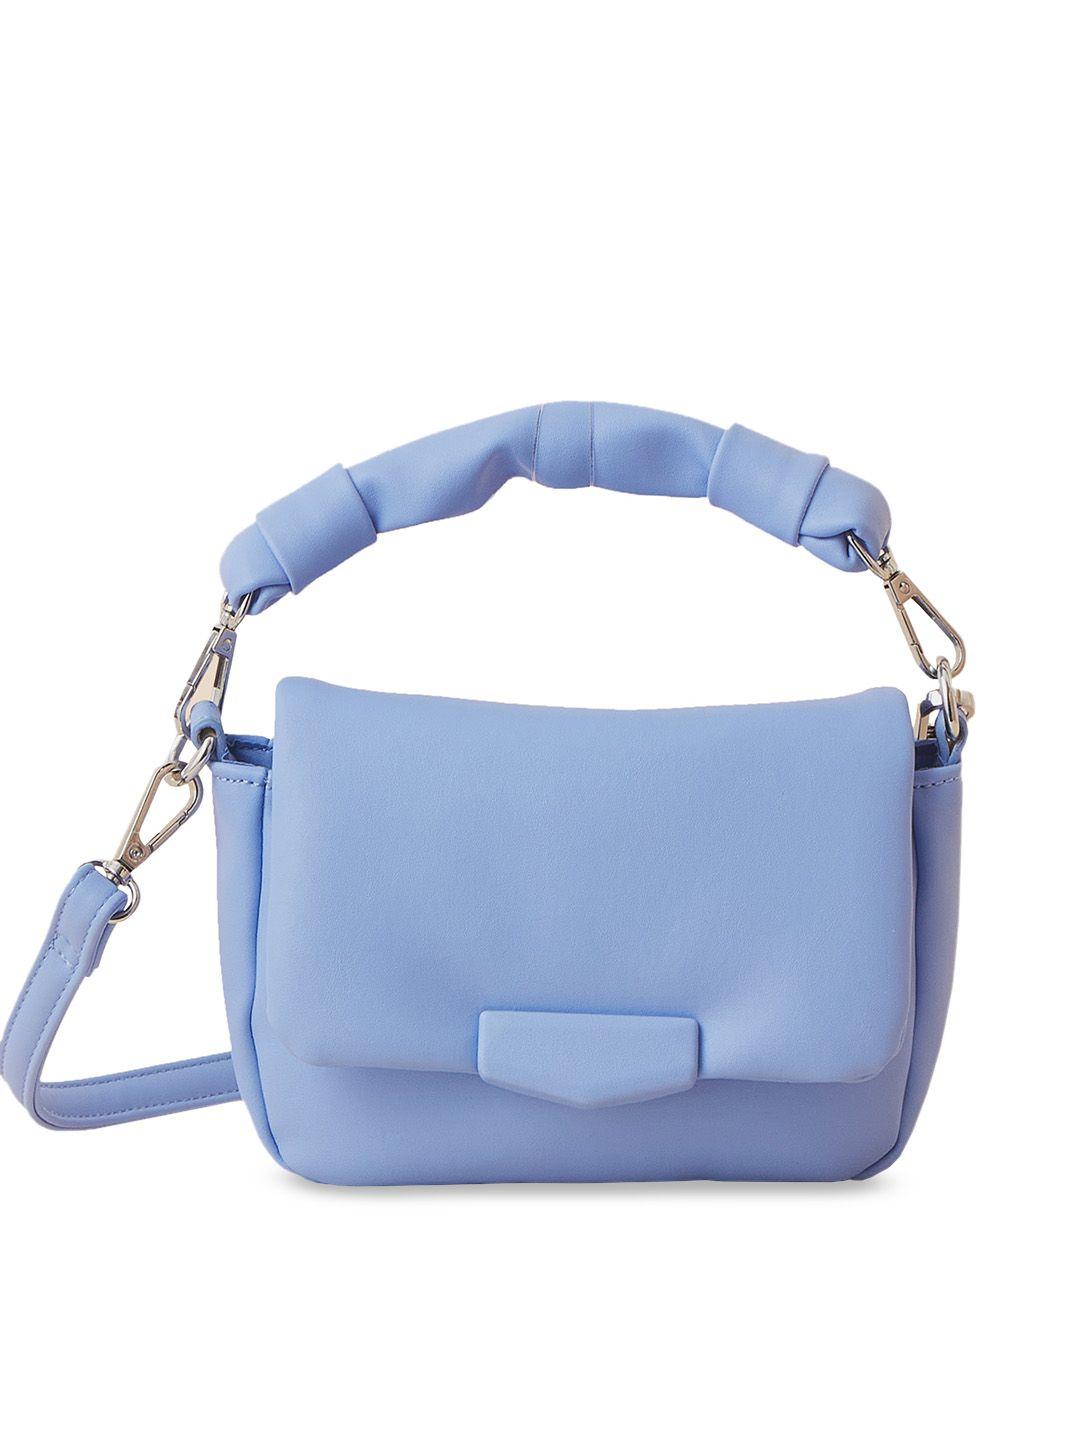 accessorize faux leather structured sling bag